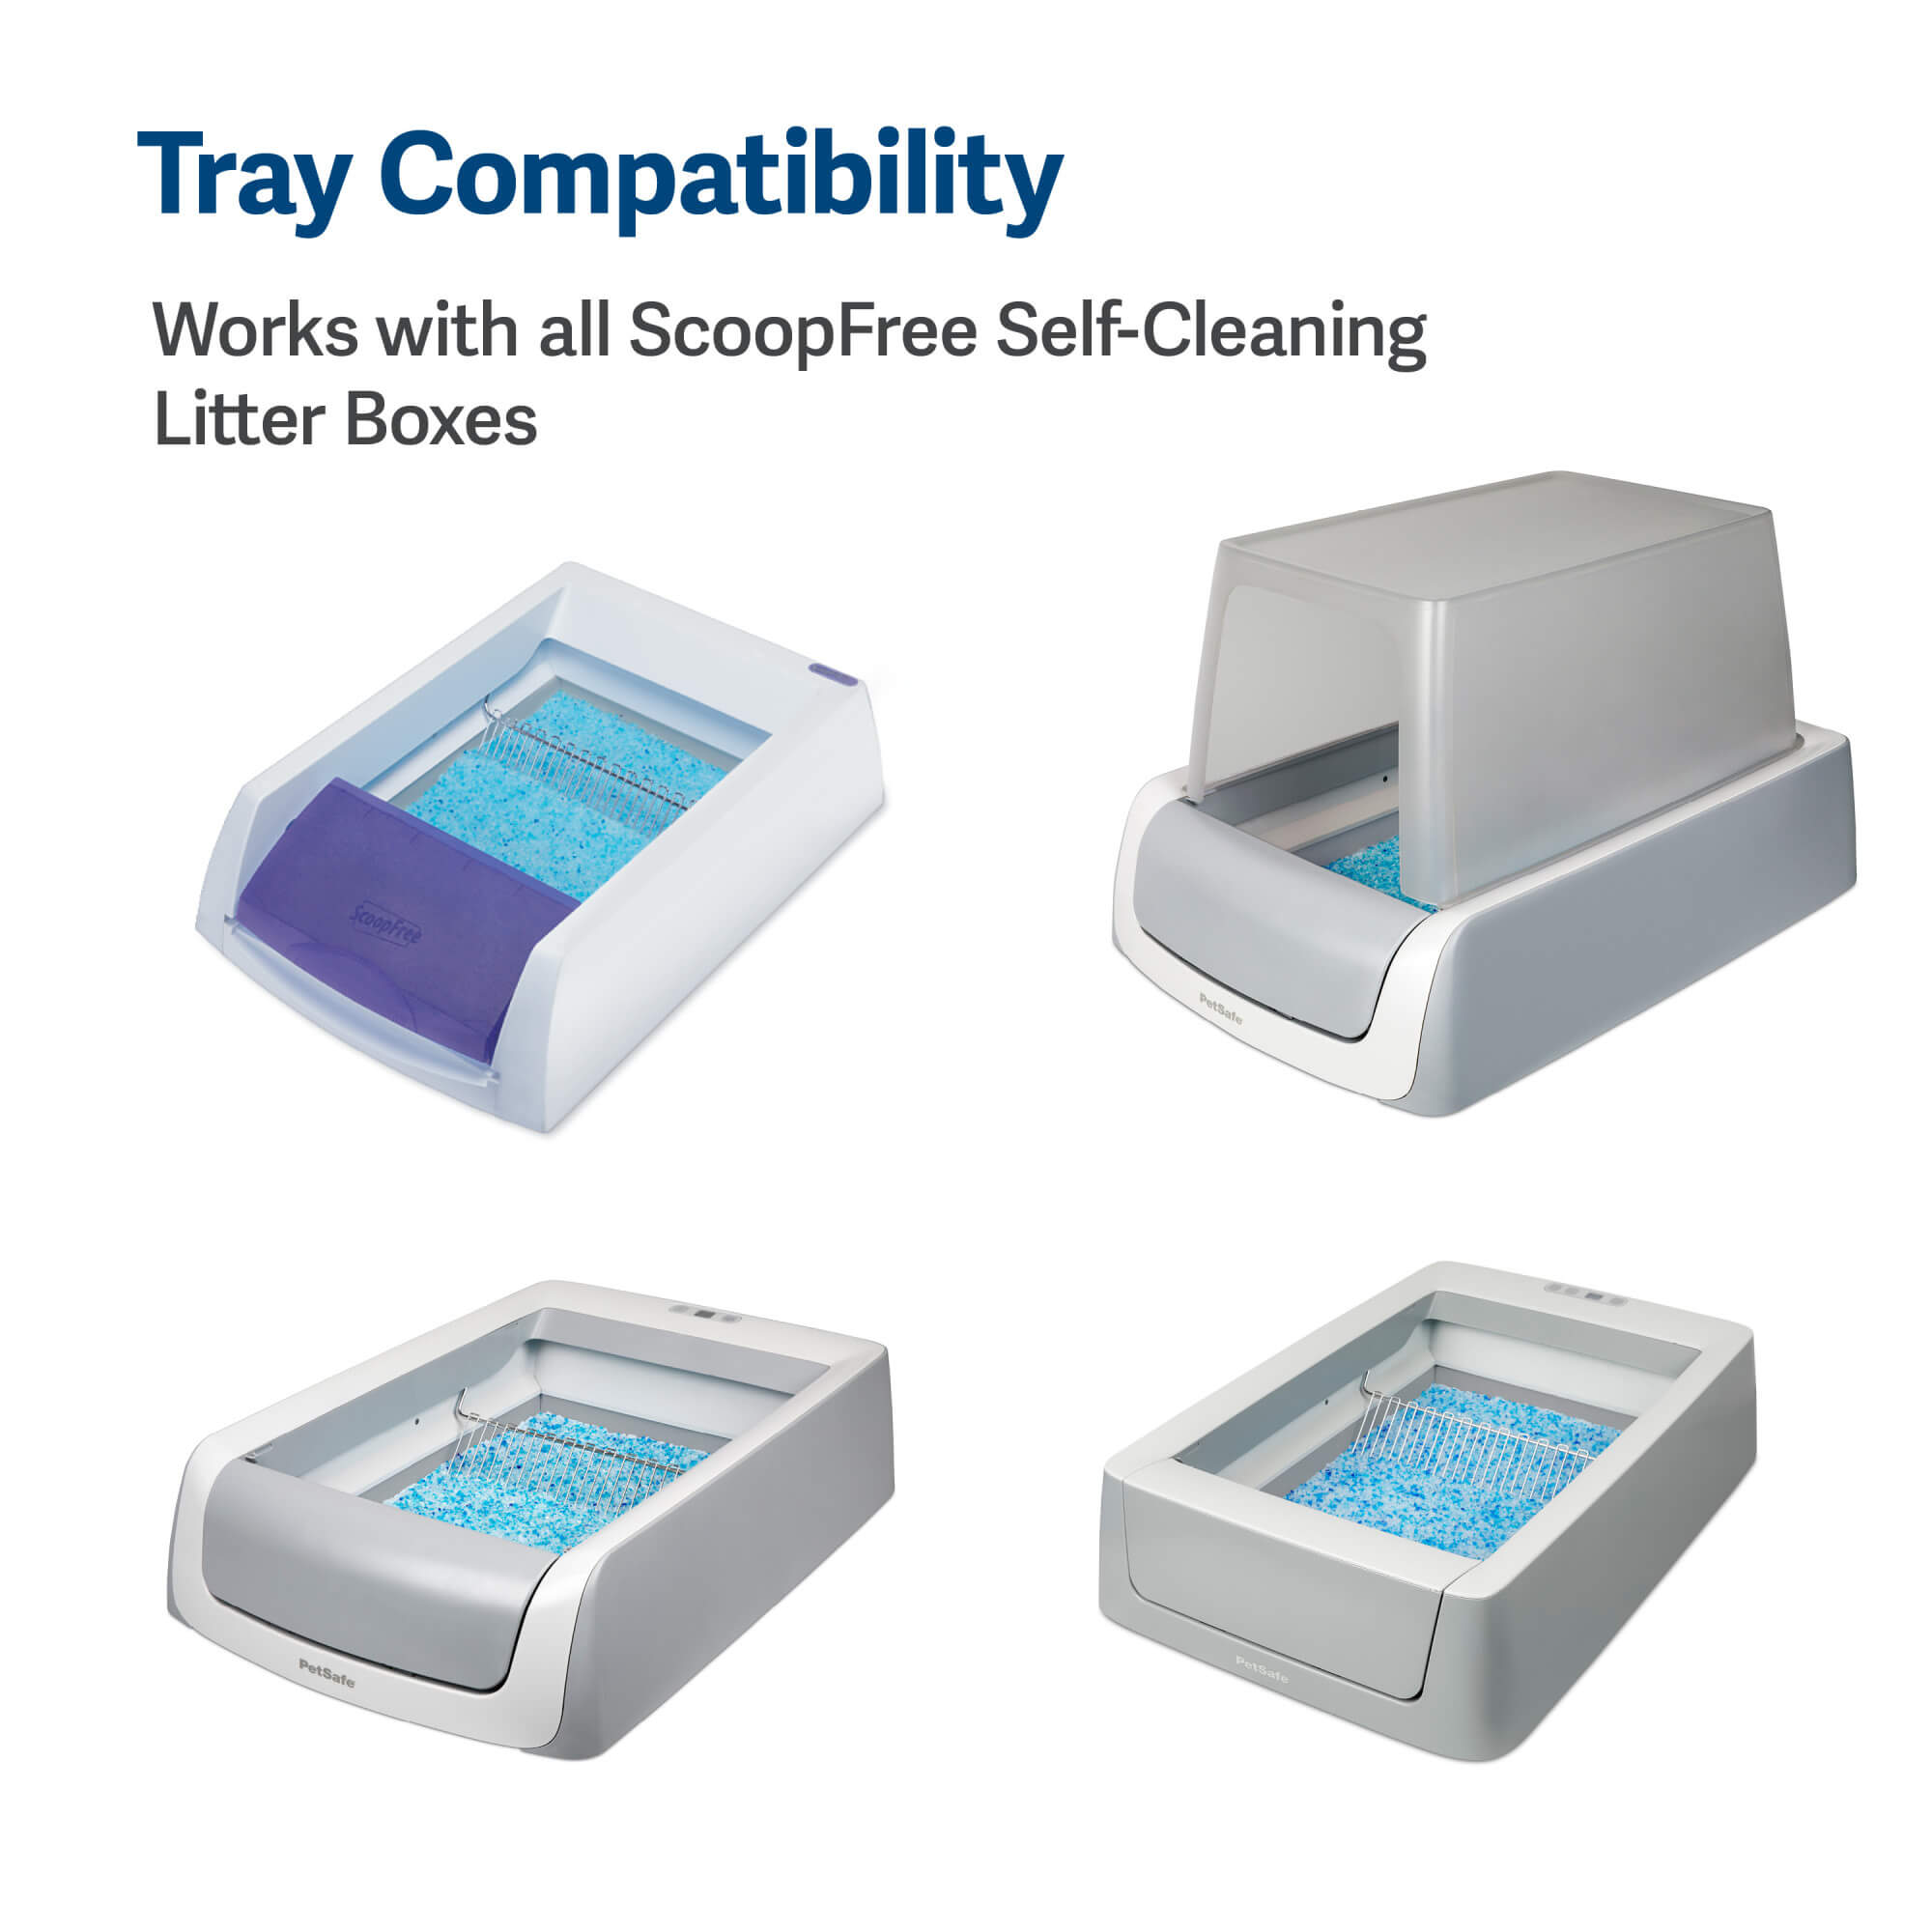 tray compatibility works with all PetSafe scoopfree self-cleaning litter boxes